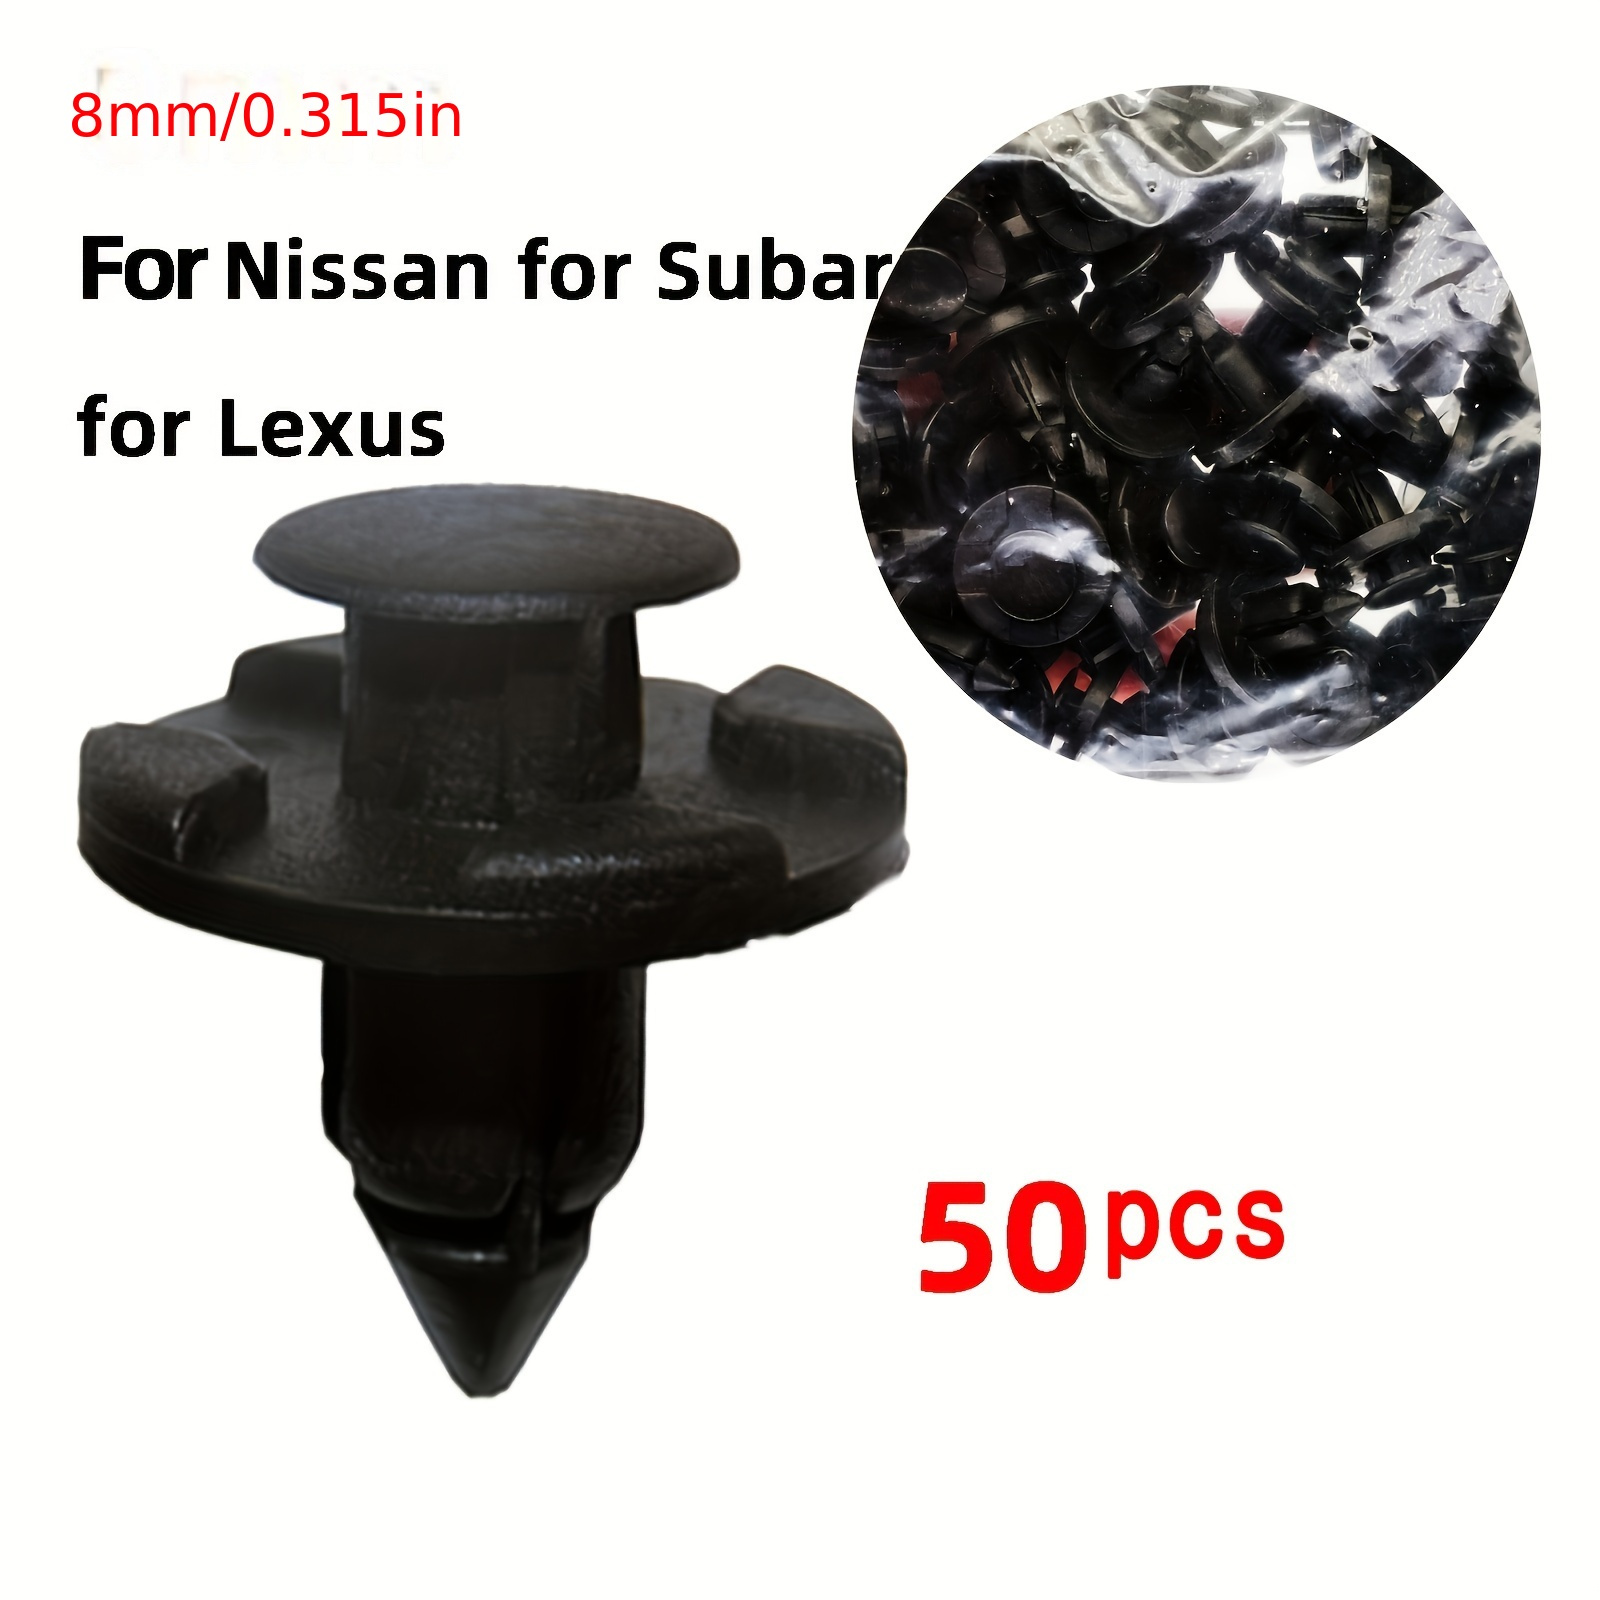 

50pcs 8mm Auto Fastener Rivet Retainer Clips Fit For Nissan X-trail For Juke For Qashqai For Tiida Leaf Fit For Subaru B18 Car Fastener Clips Removal Tool